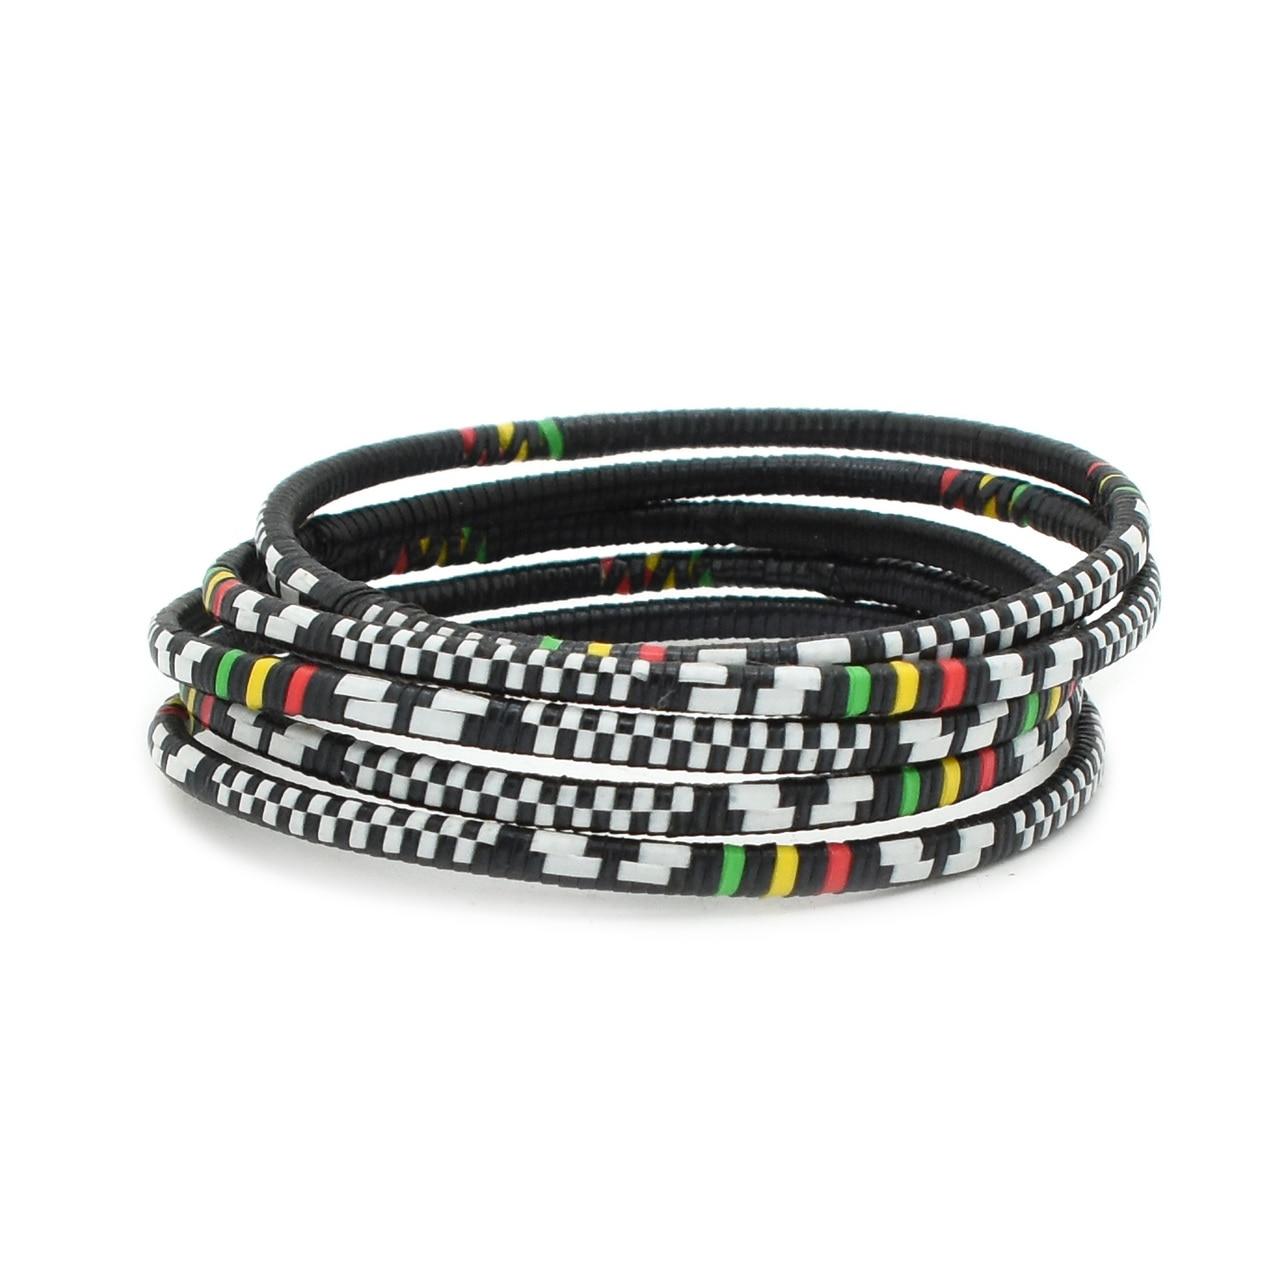 Woven Recycled Plastic Bracelets - Black, White, Red, Yellow, & Green from  Mali